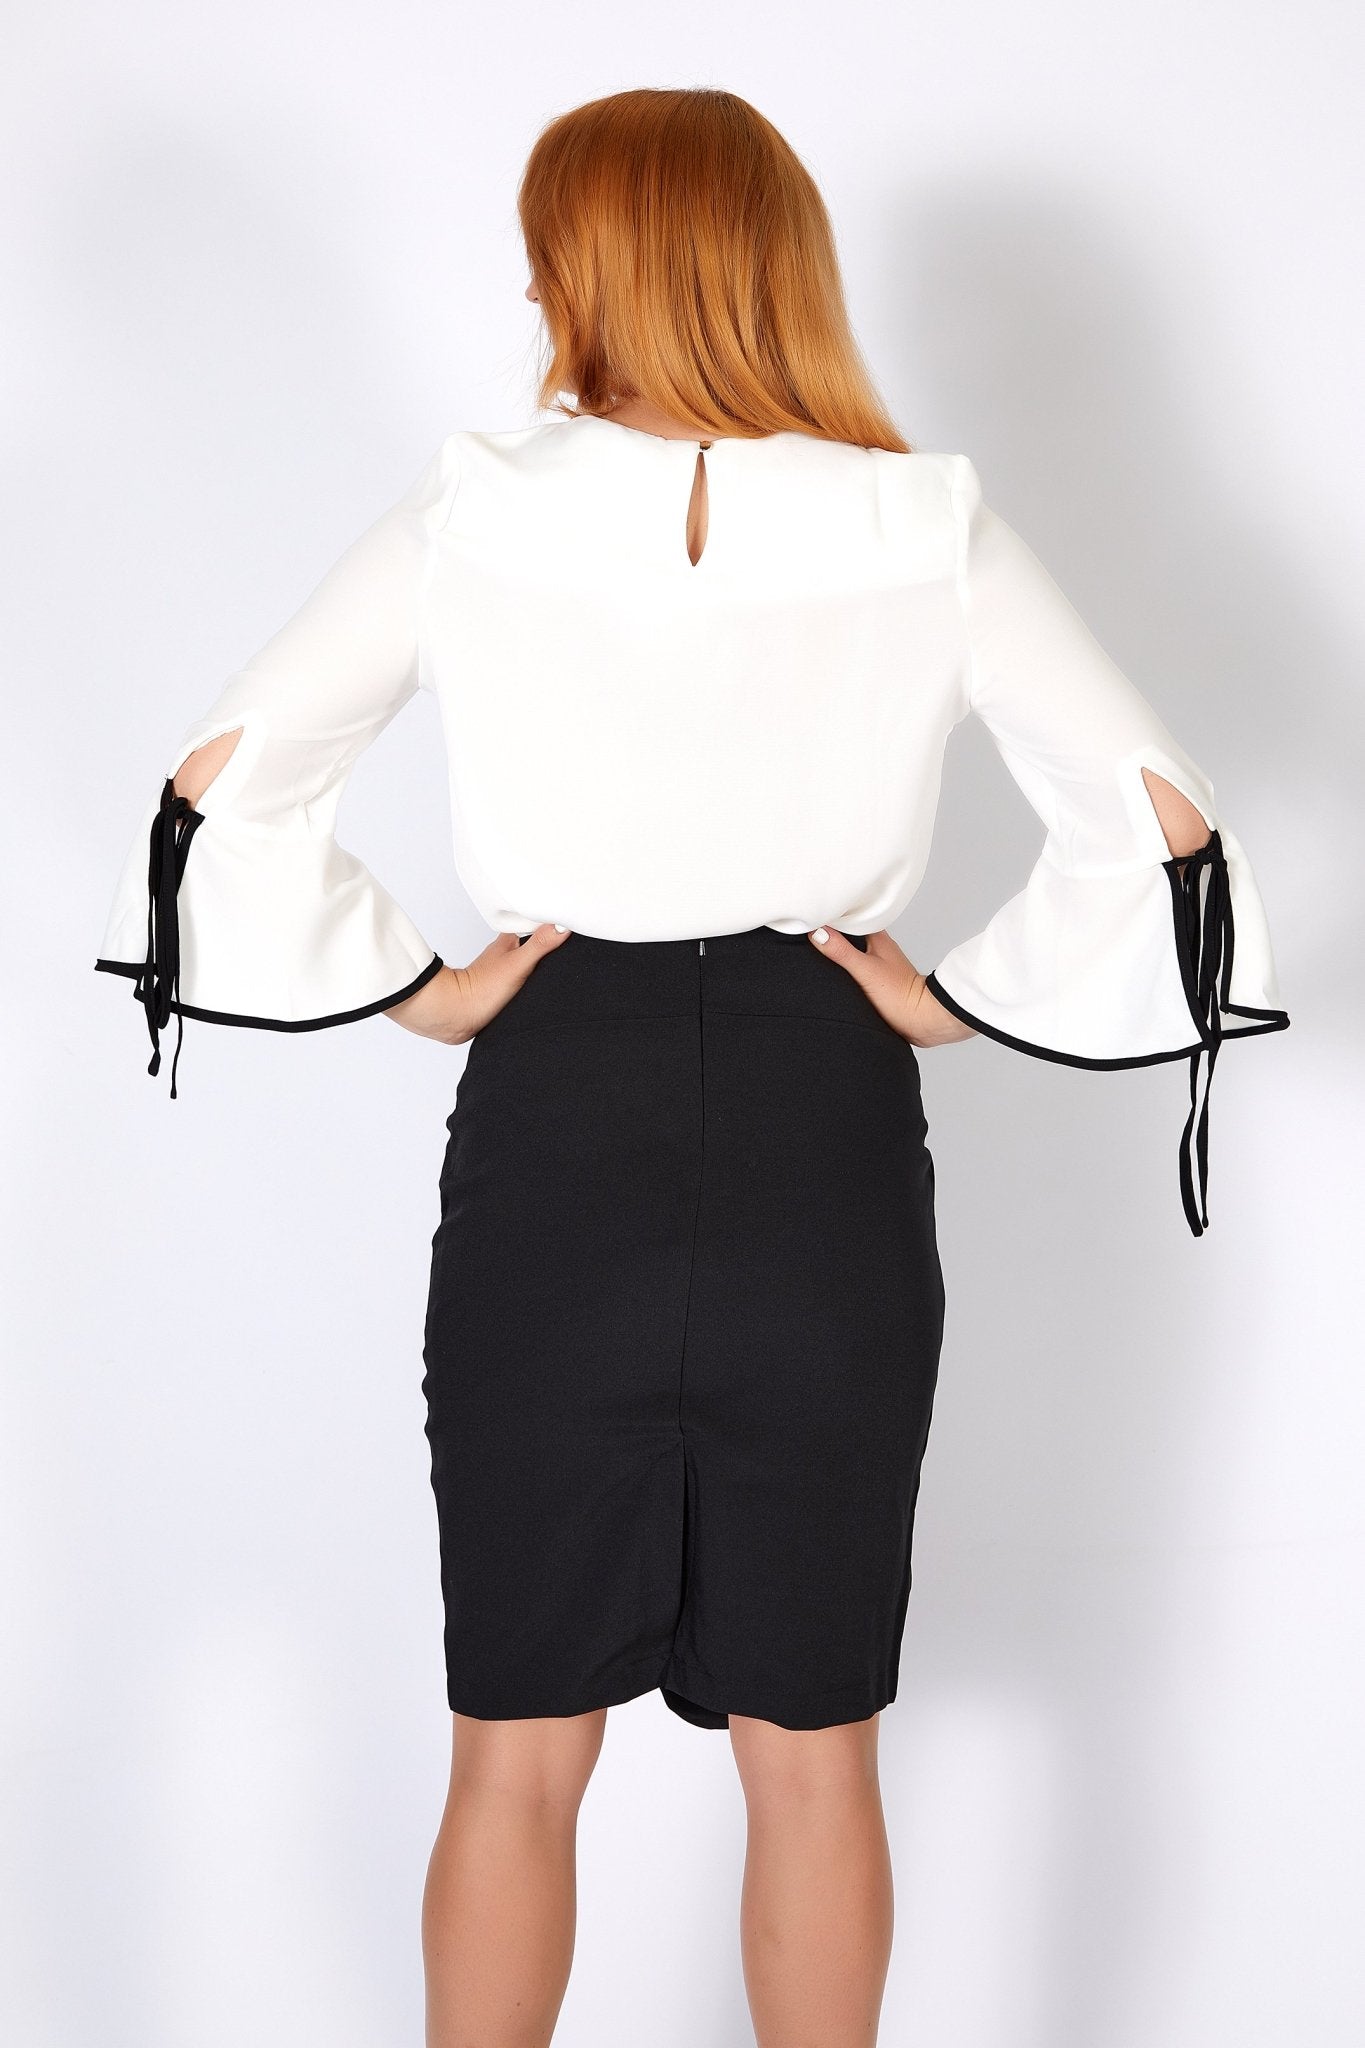 3RD Love Vivid White Bell Sleeved Top in Ivory with Black Trim - Hey Sara